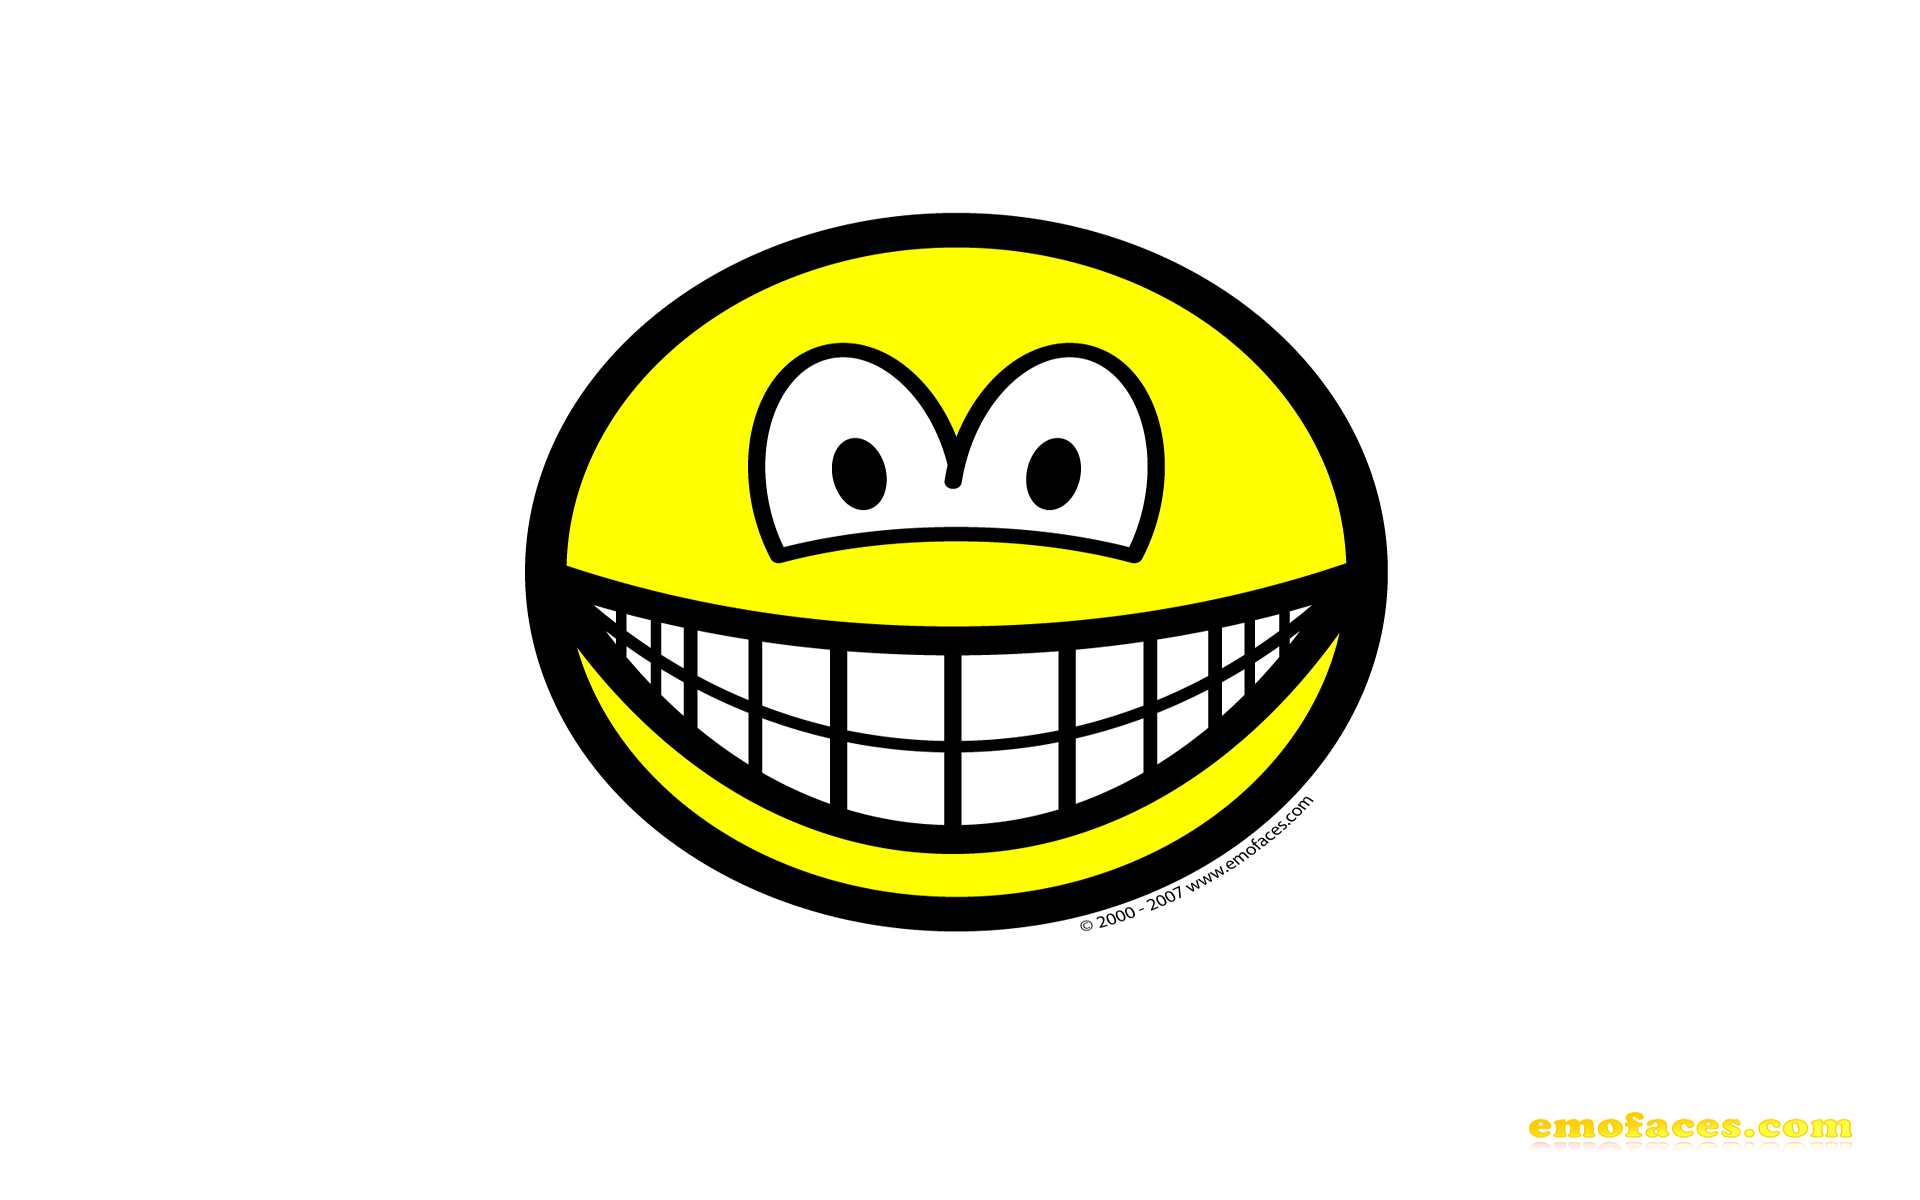 Large smile icon on your wallpaper background. Install it today!